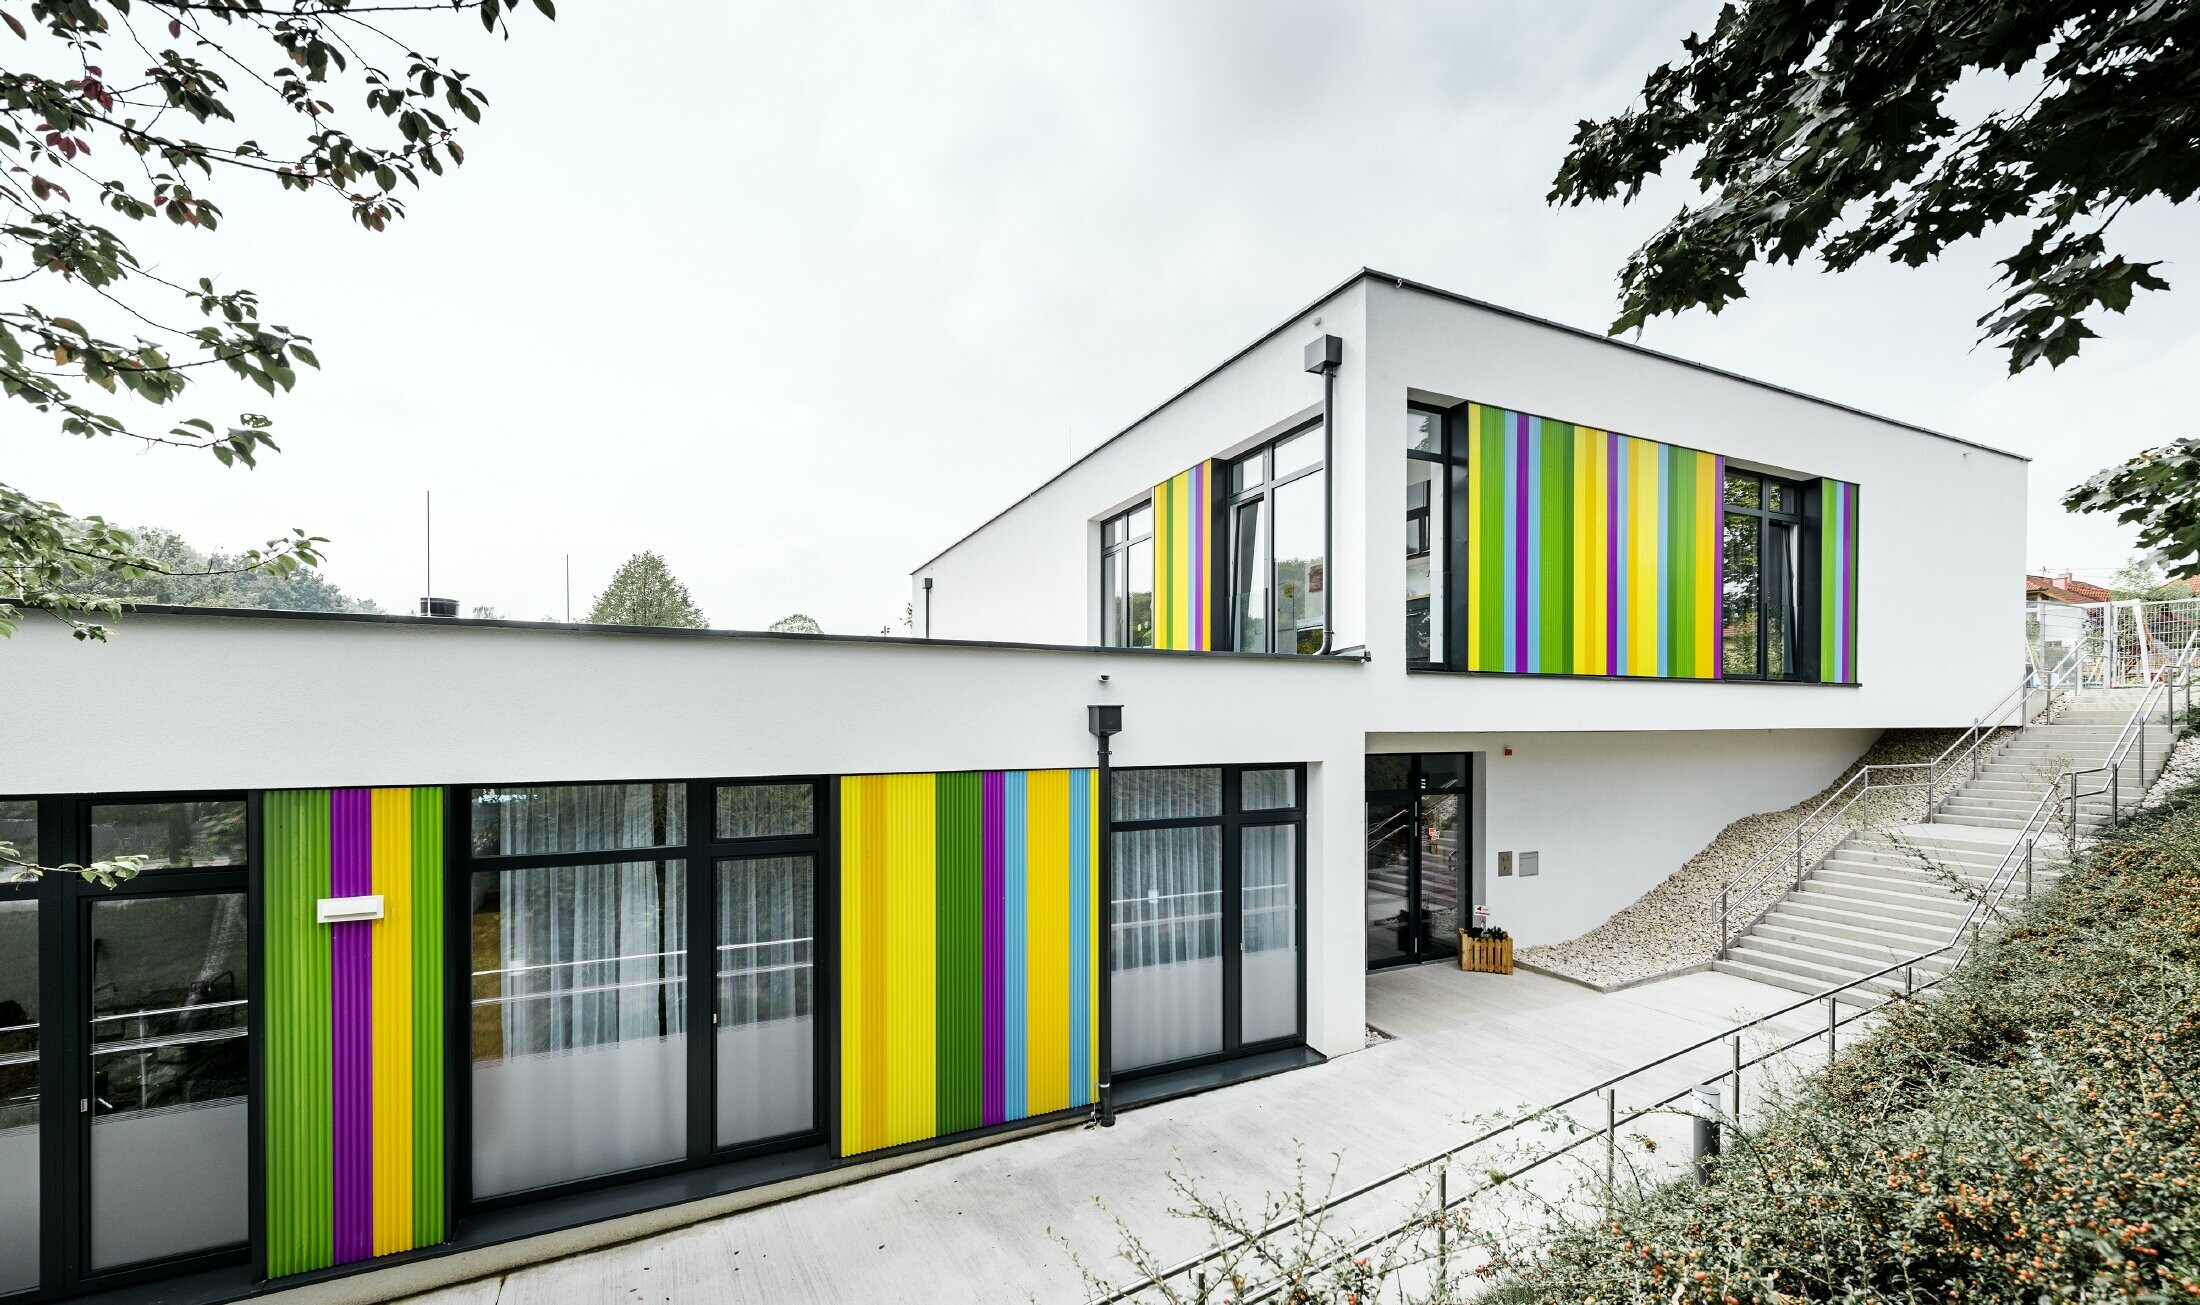 Colourful PREFA façade elements for the kindergarten in Hargelsberg. The building has a flat roof and large, floor-to-ceiling windows.